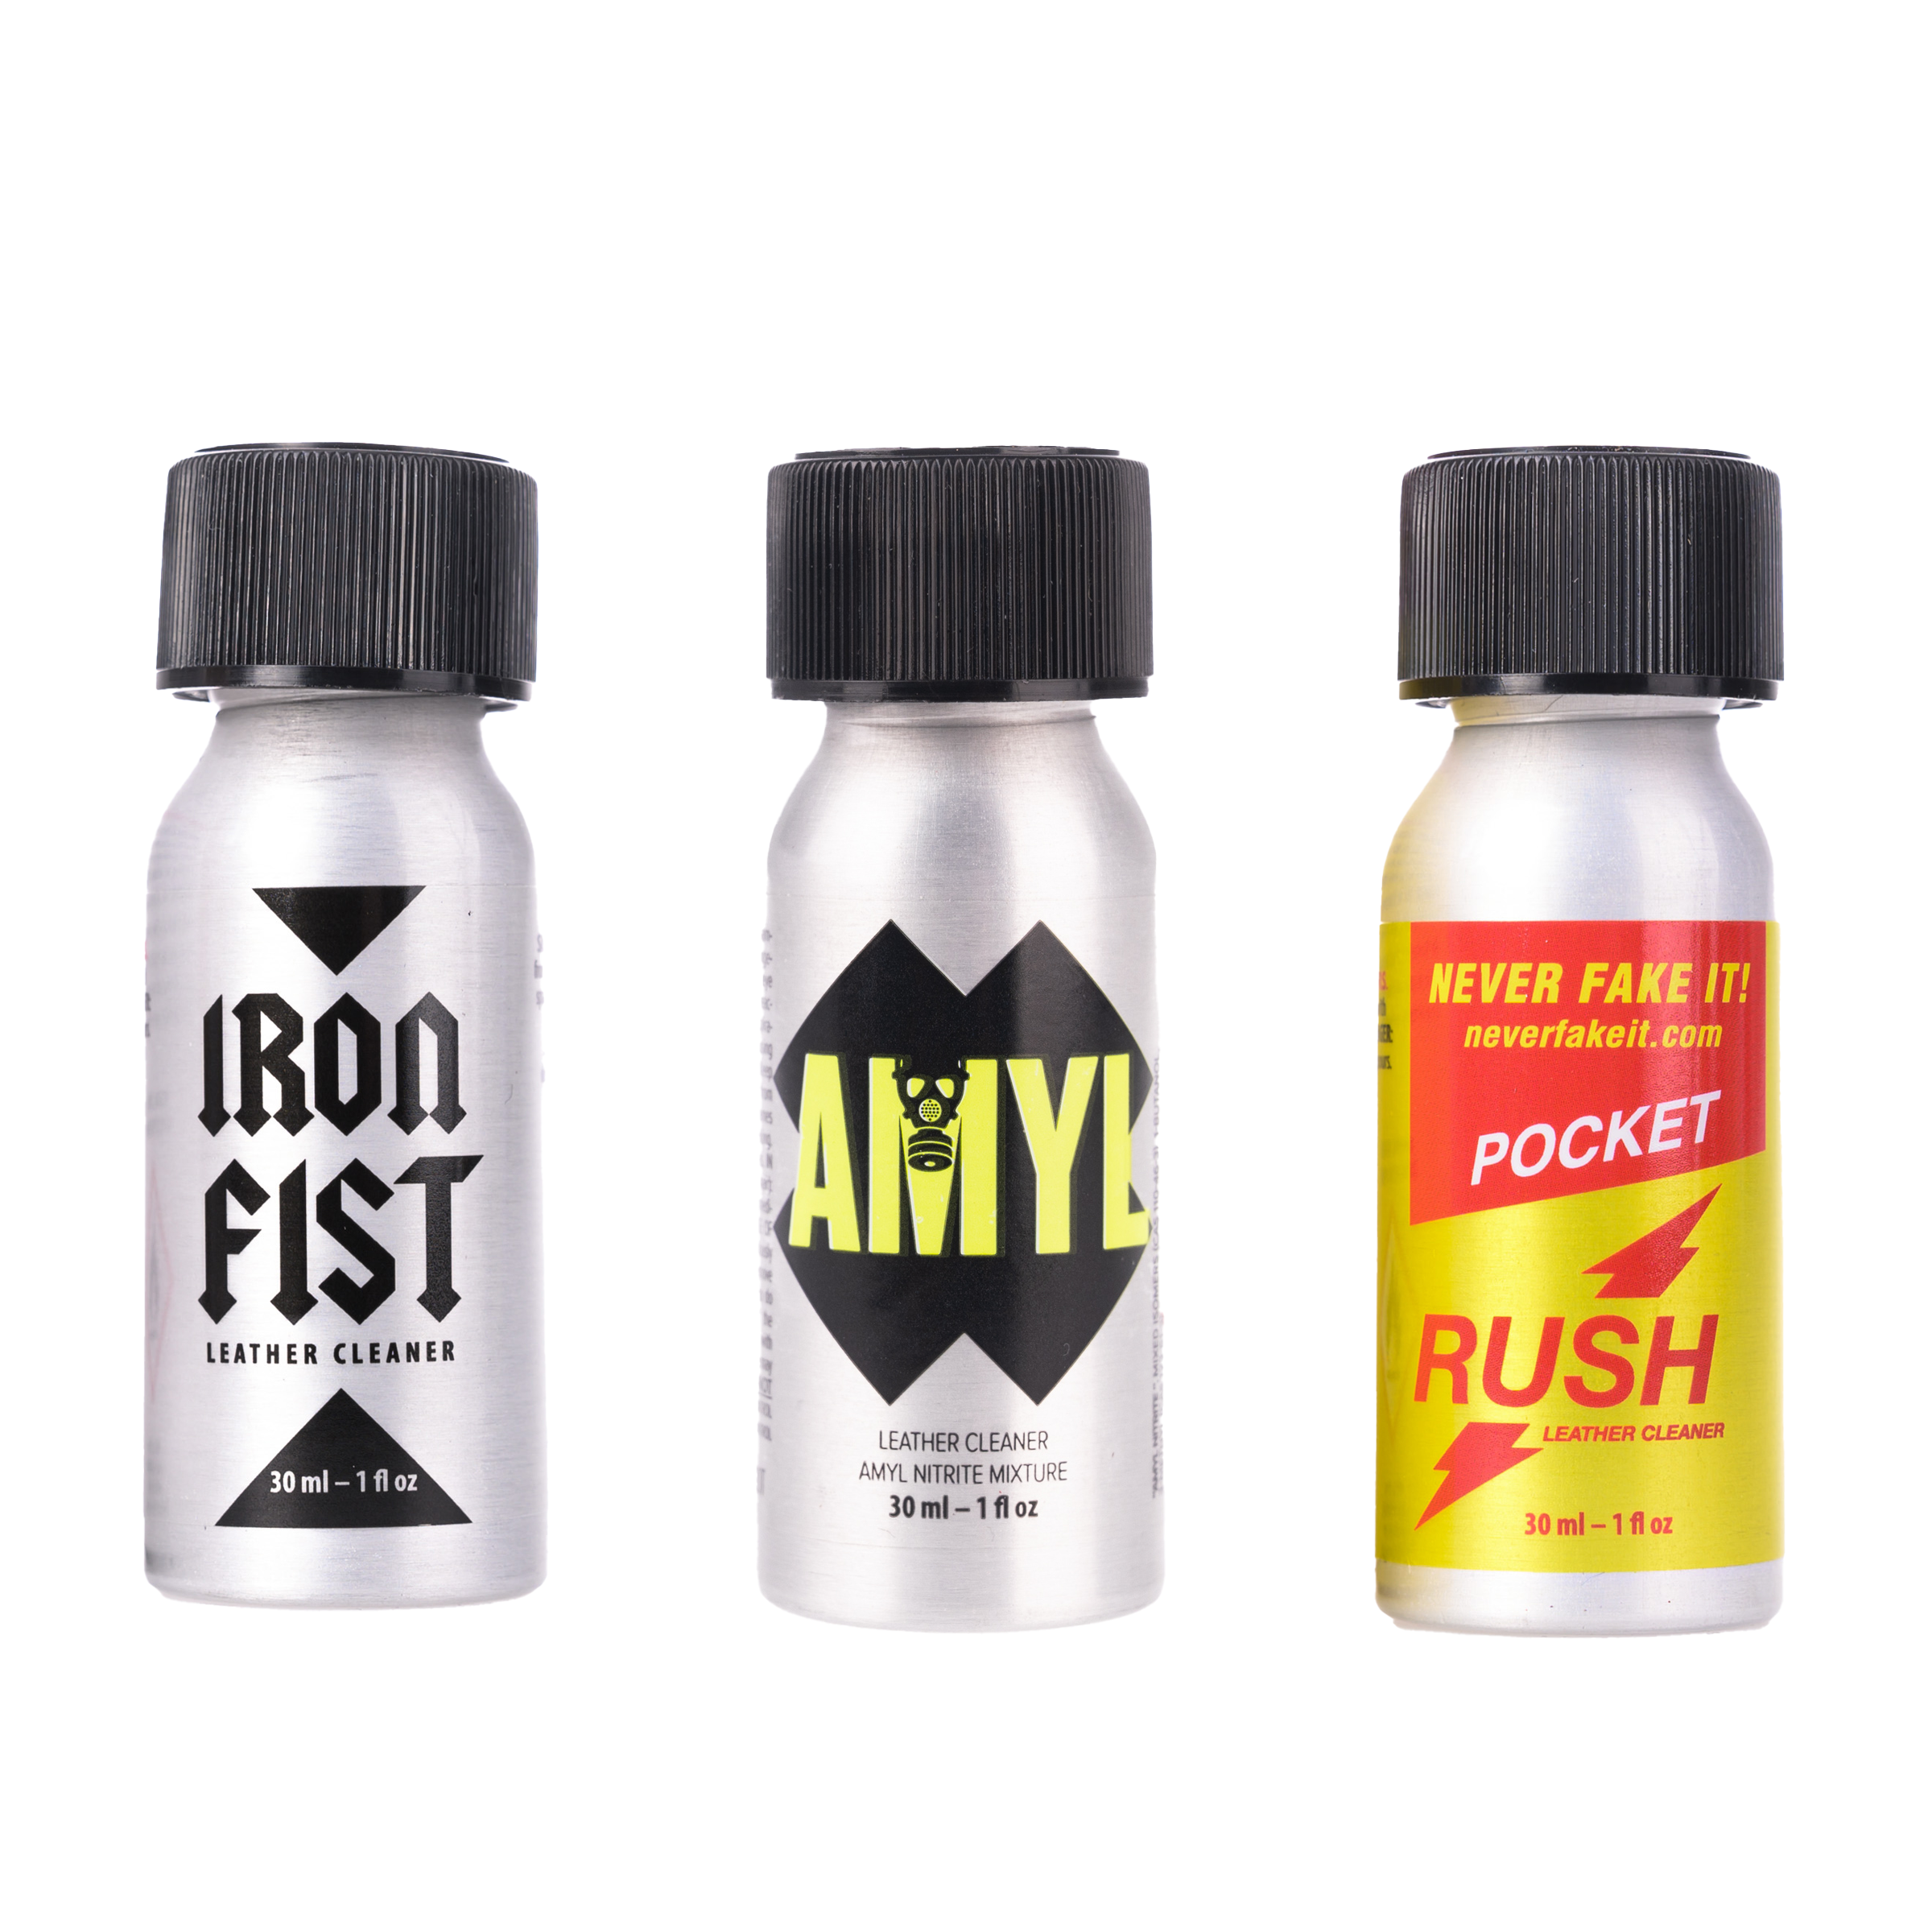 Metal Pack, POPPERS UK, POPPERS USA, FREE DELIVERY, NEXT DAY DELIVERY